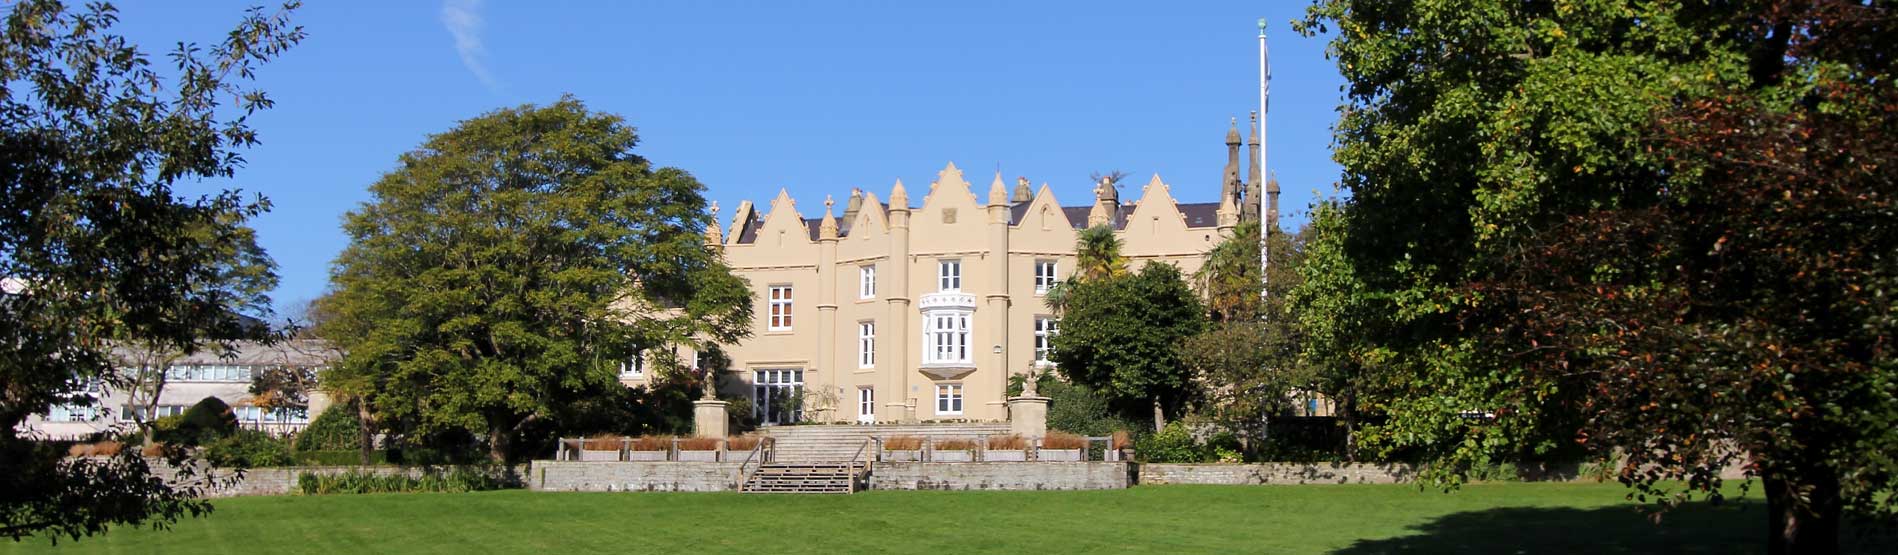 the Singleton Abbey on a bright sunny day